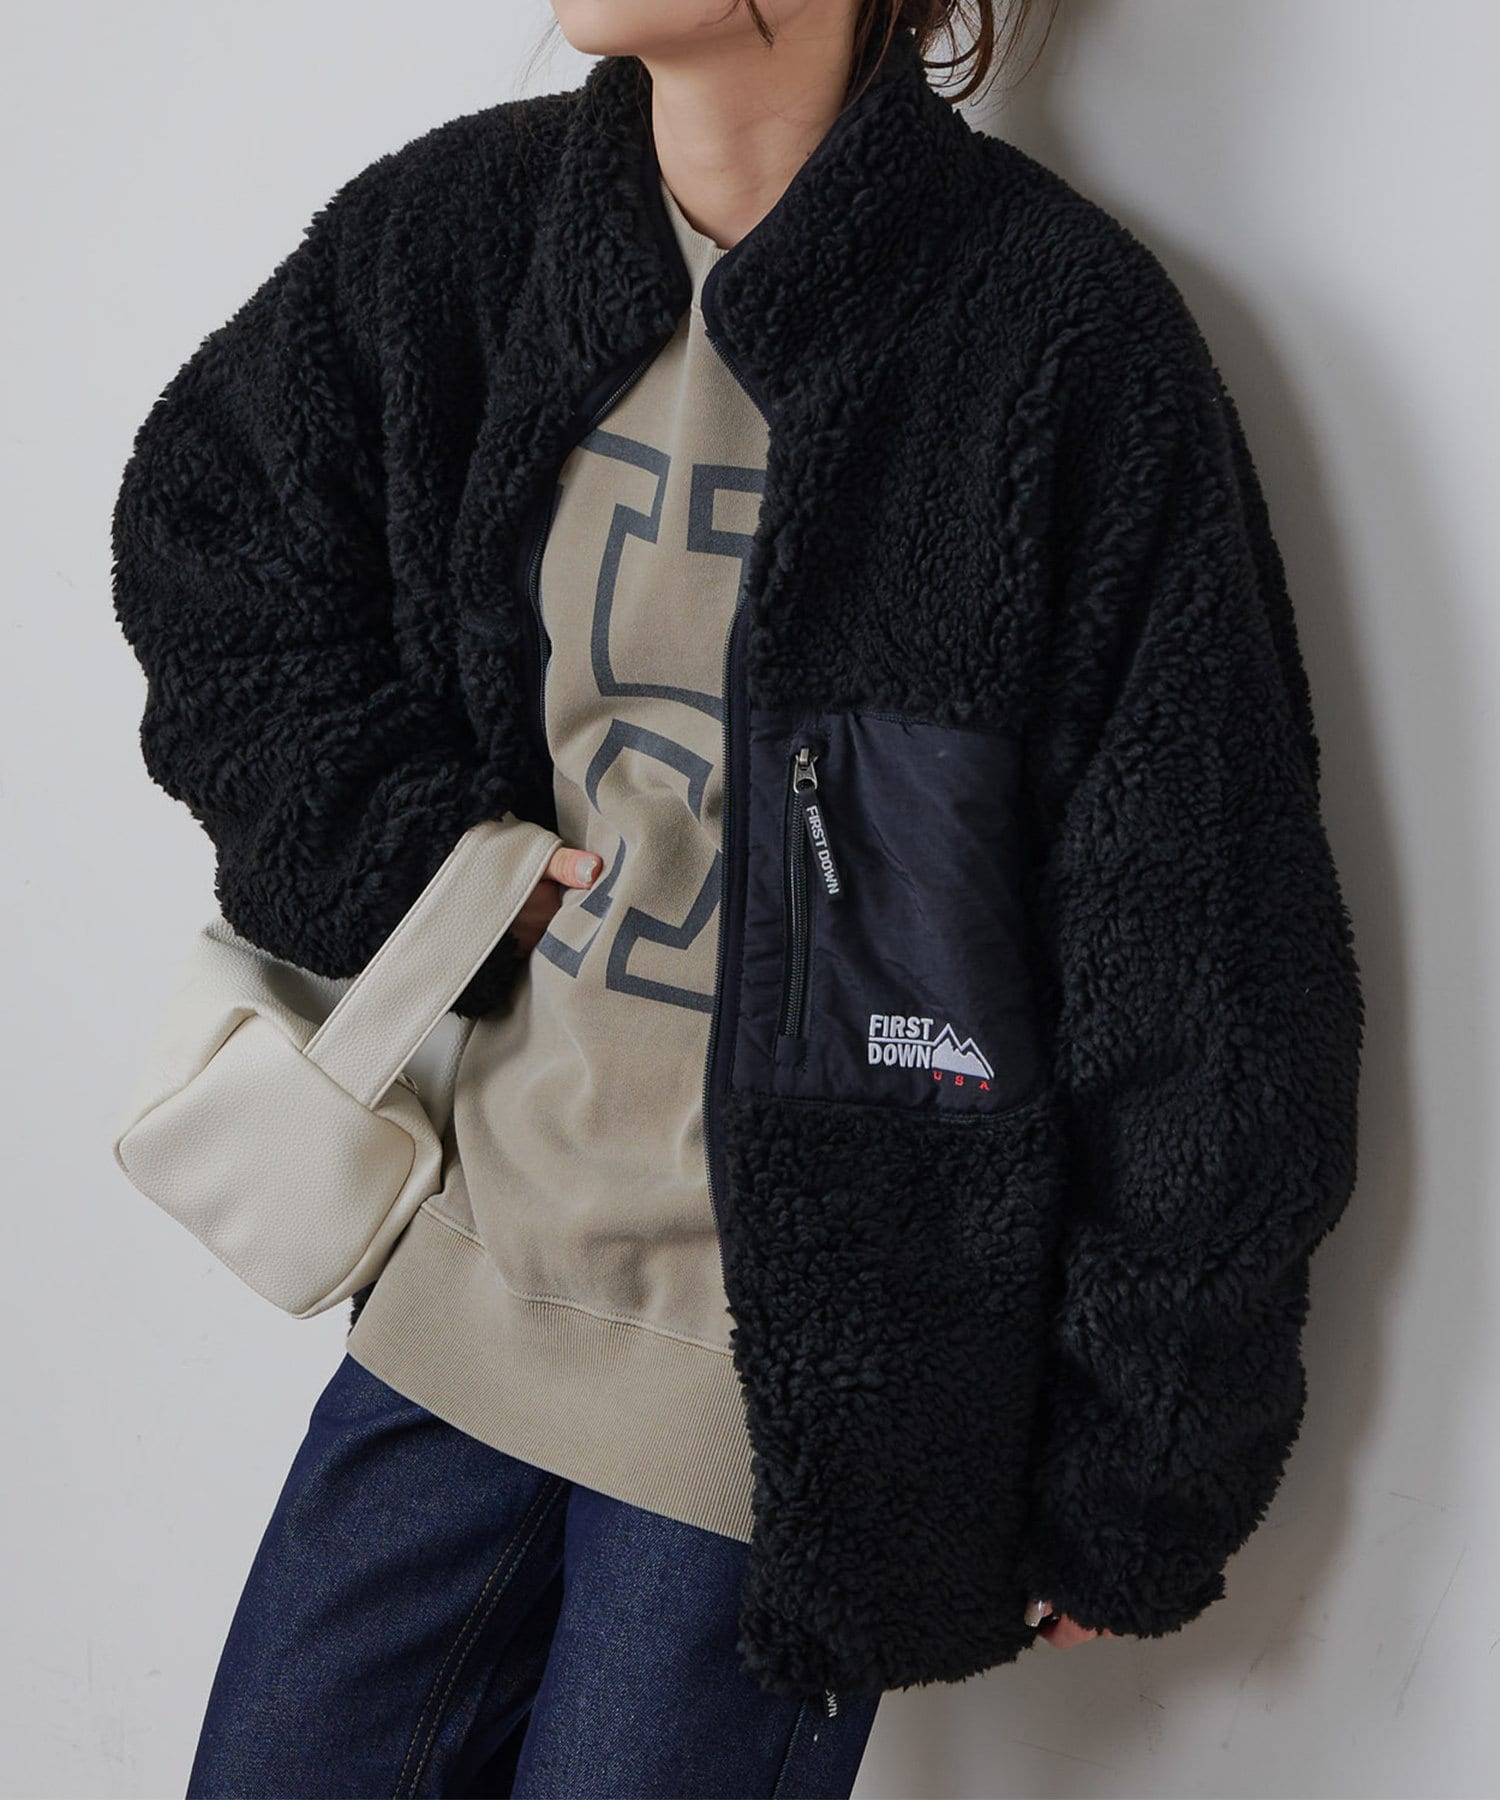 FIRST DOWNBOA JACKET   pual ce cinピュアルセシンレディース